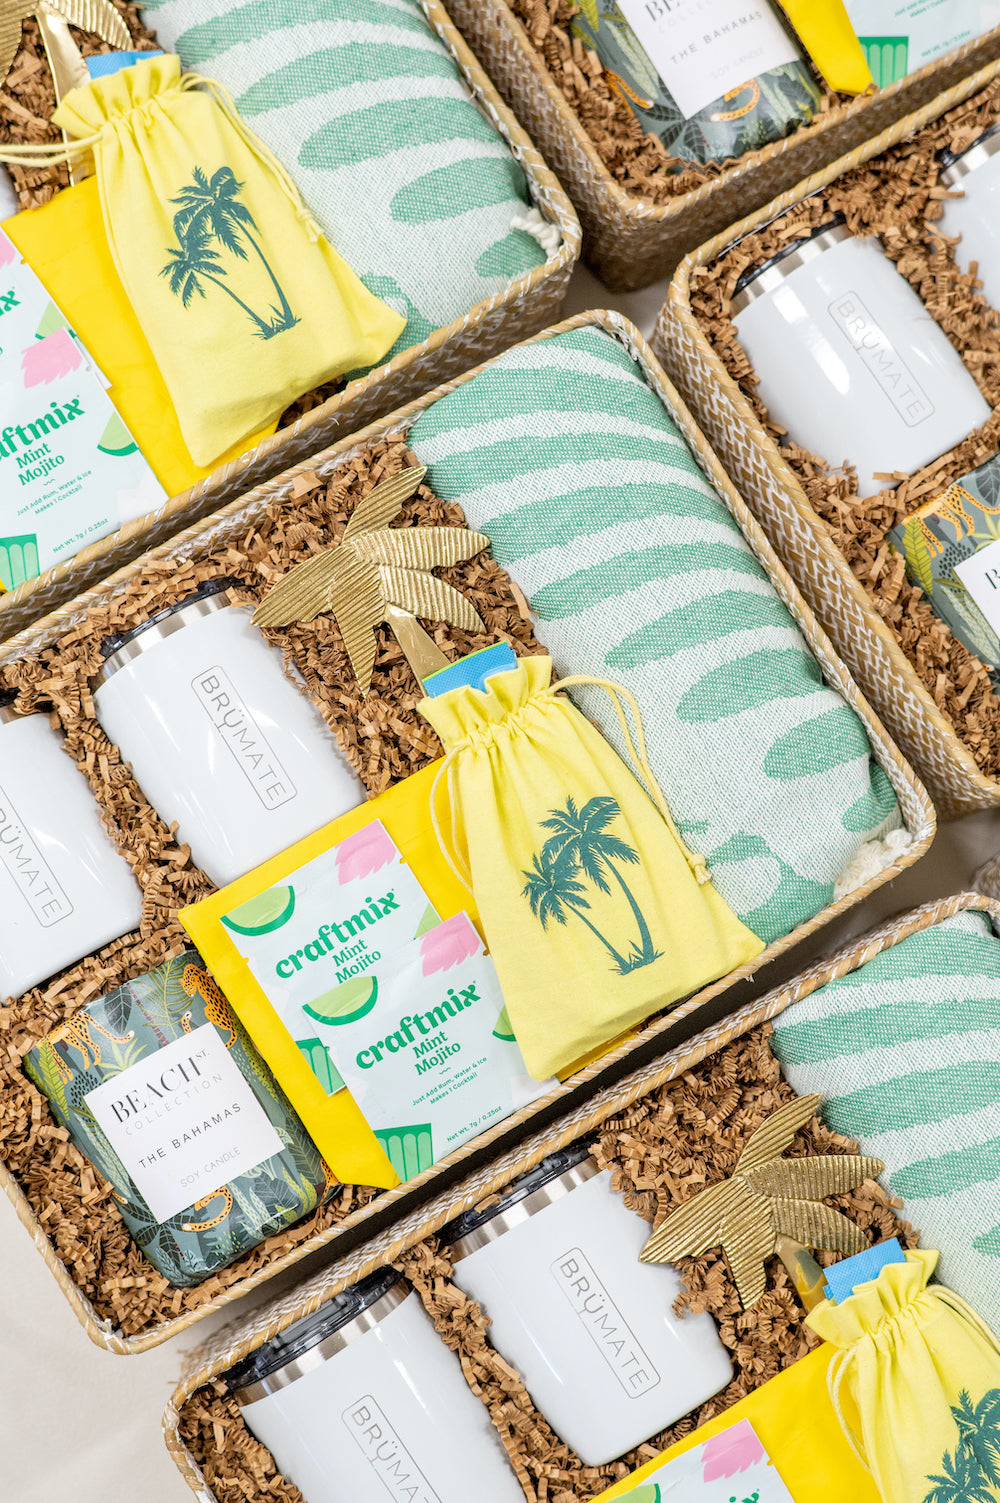 Custom Corporate Event Welcome Gifts, Bahamas Trip, Beach, Luxury Branded, curated by Marigold & Grey